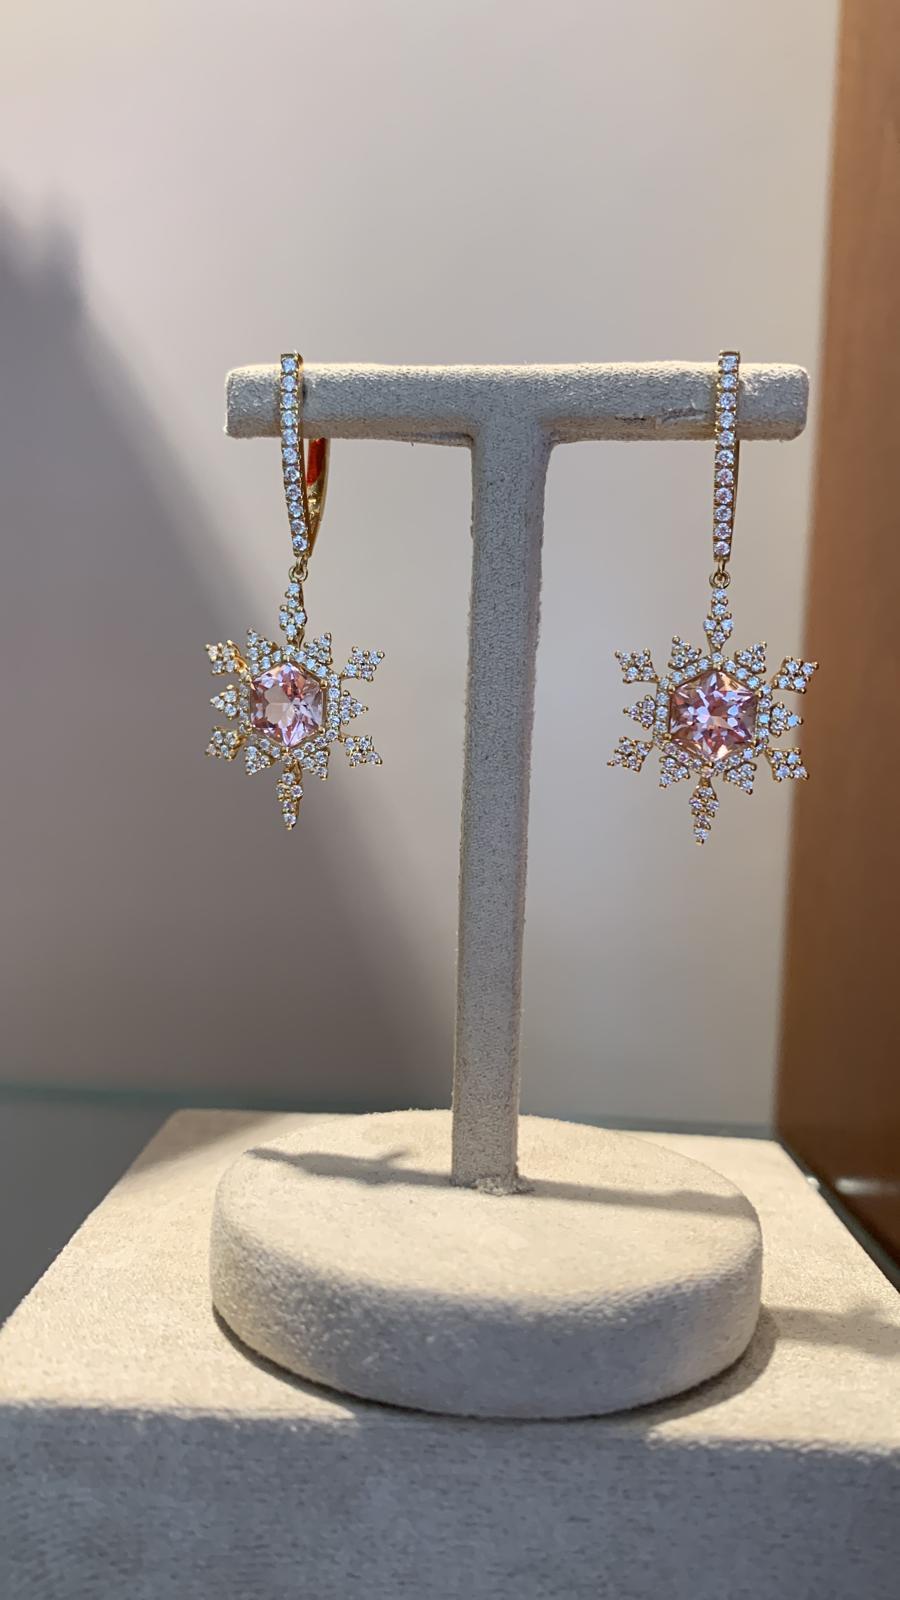 Rose pink tourmaline and Diamond snowflake earrings 
2 tourmaline gems at 2.31 Carat 
Diamond F color and VS clarity 1.01 Carat 
18 K yellow gold 
The earrings are lights and very comfortable to wear day to night. 
Signed 
Comes with a black lather